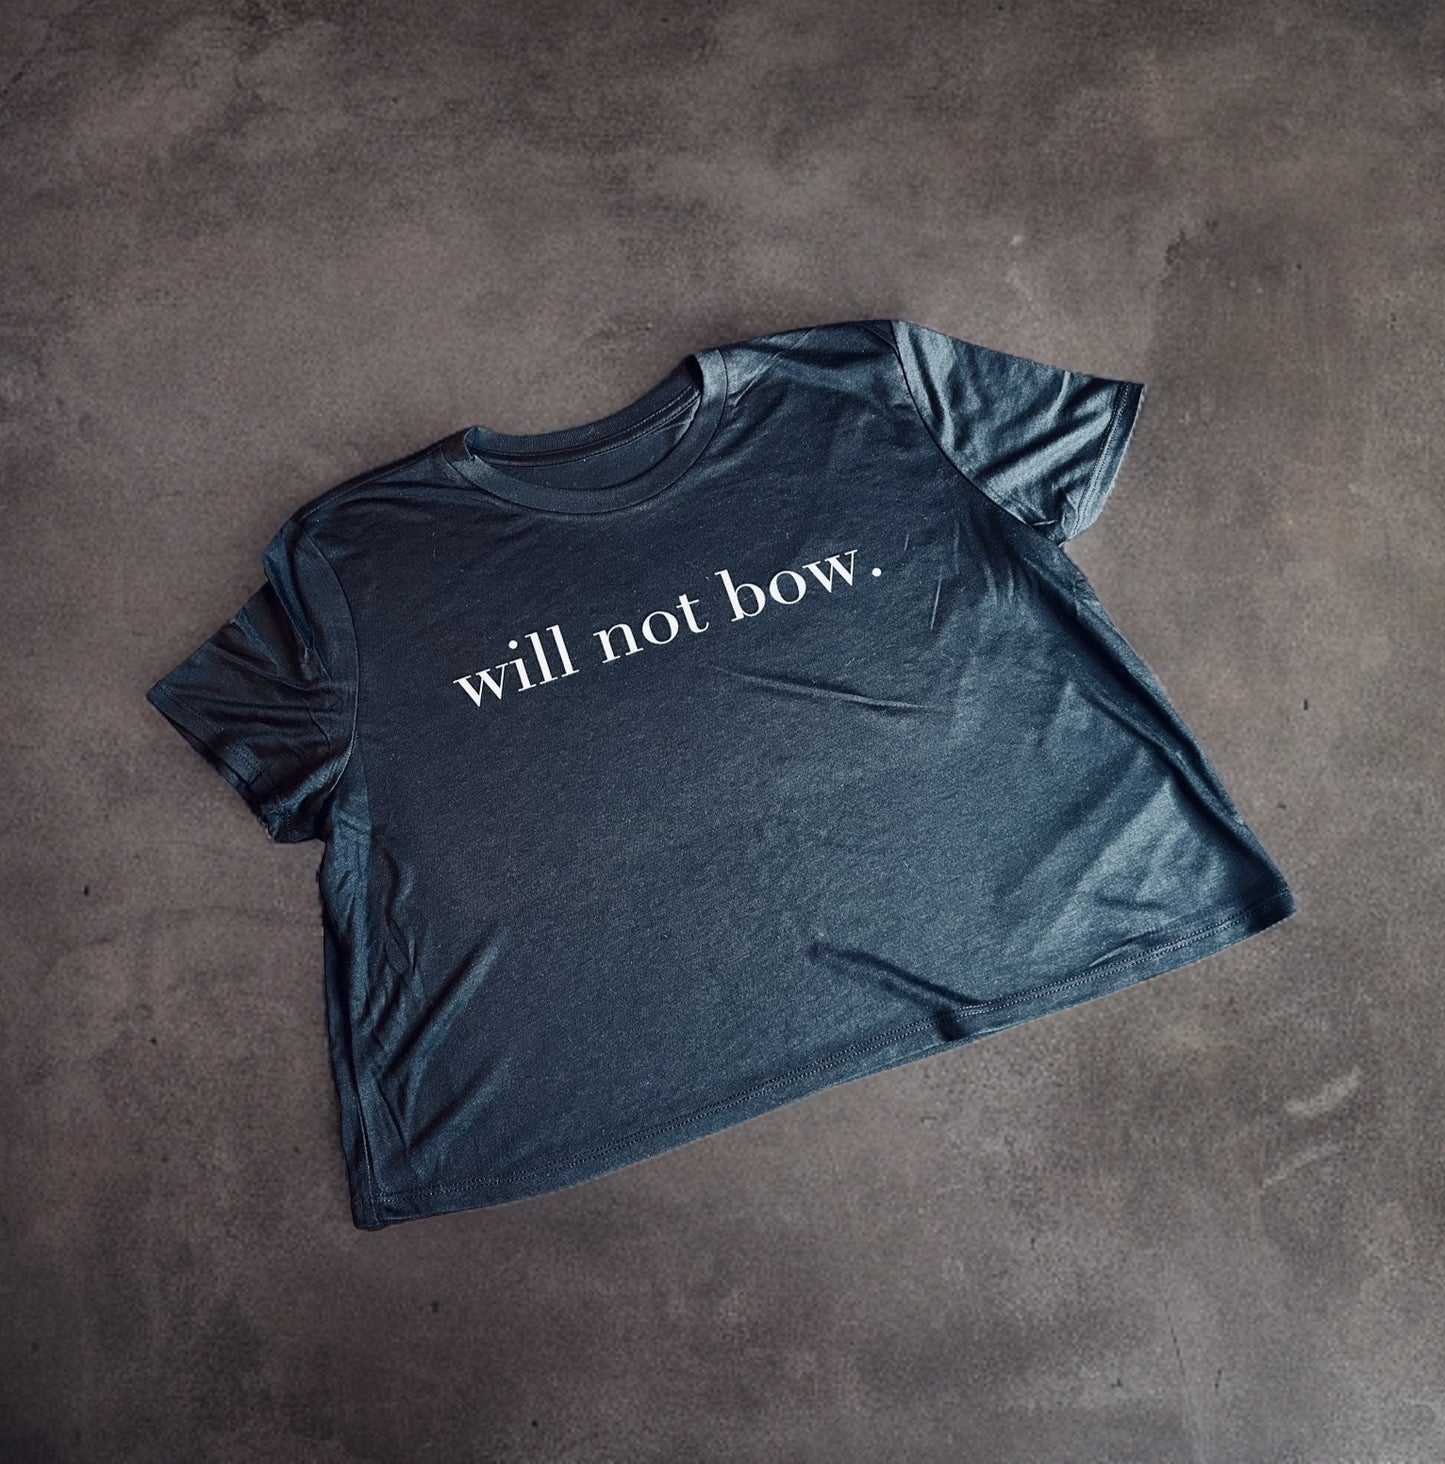 WILL NOT BOW - Crop Tee - Ladies